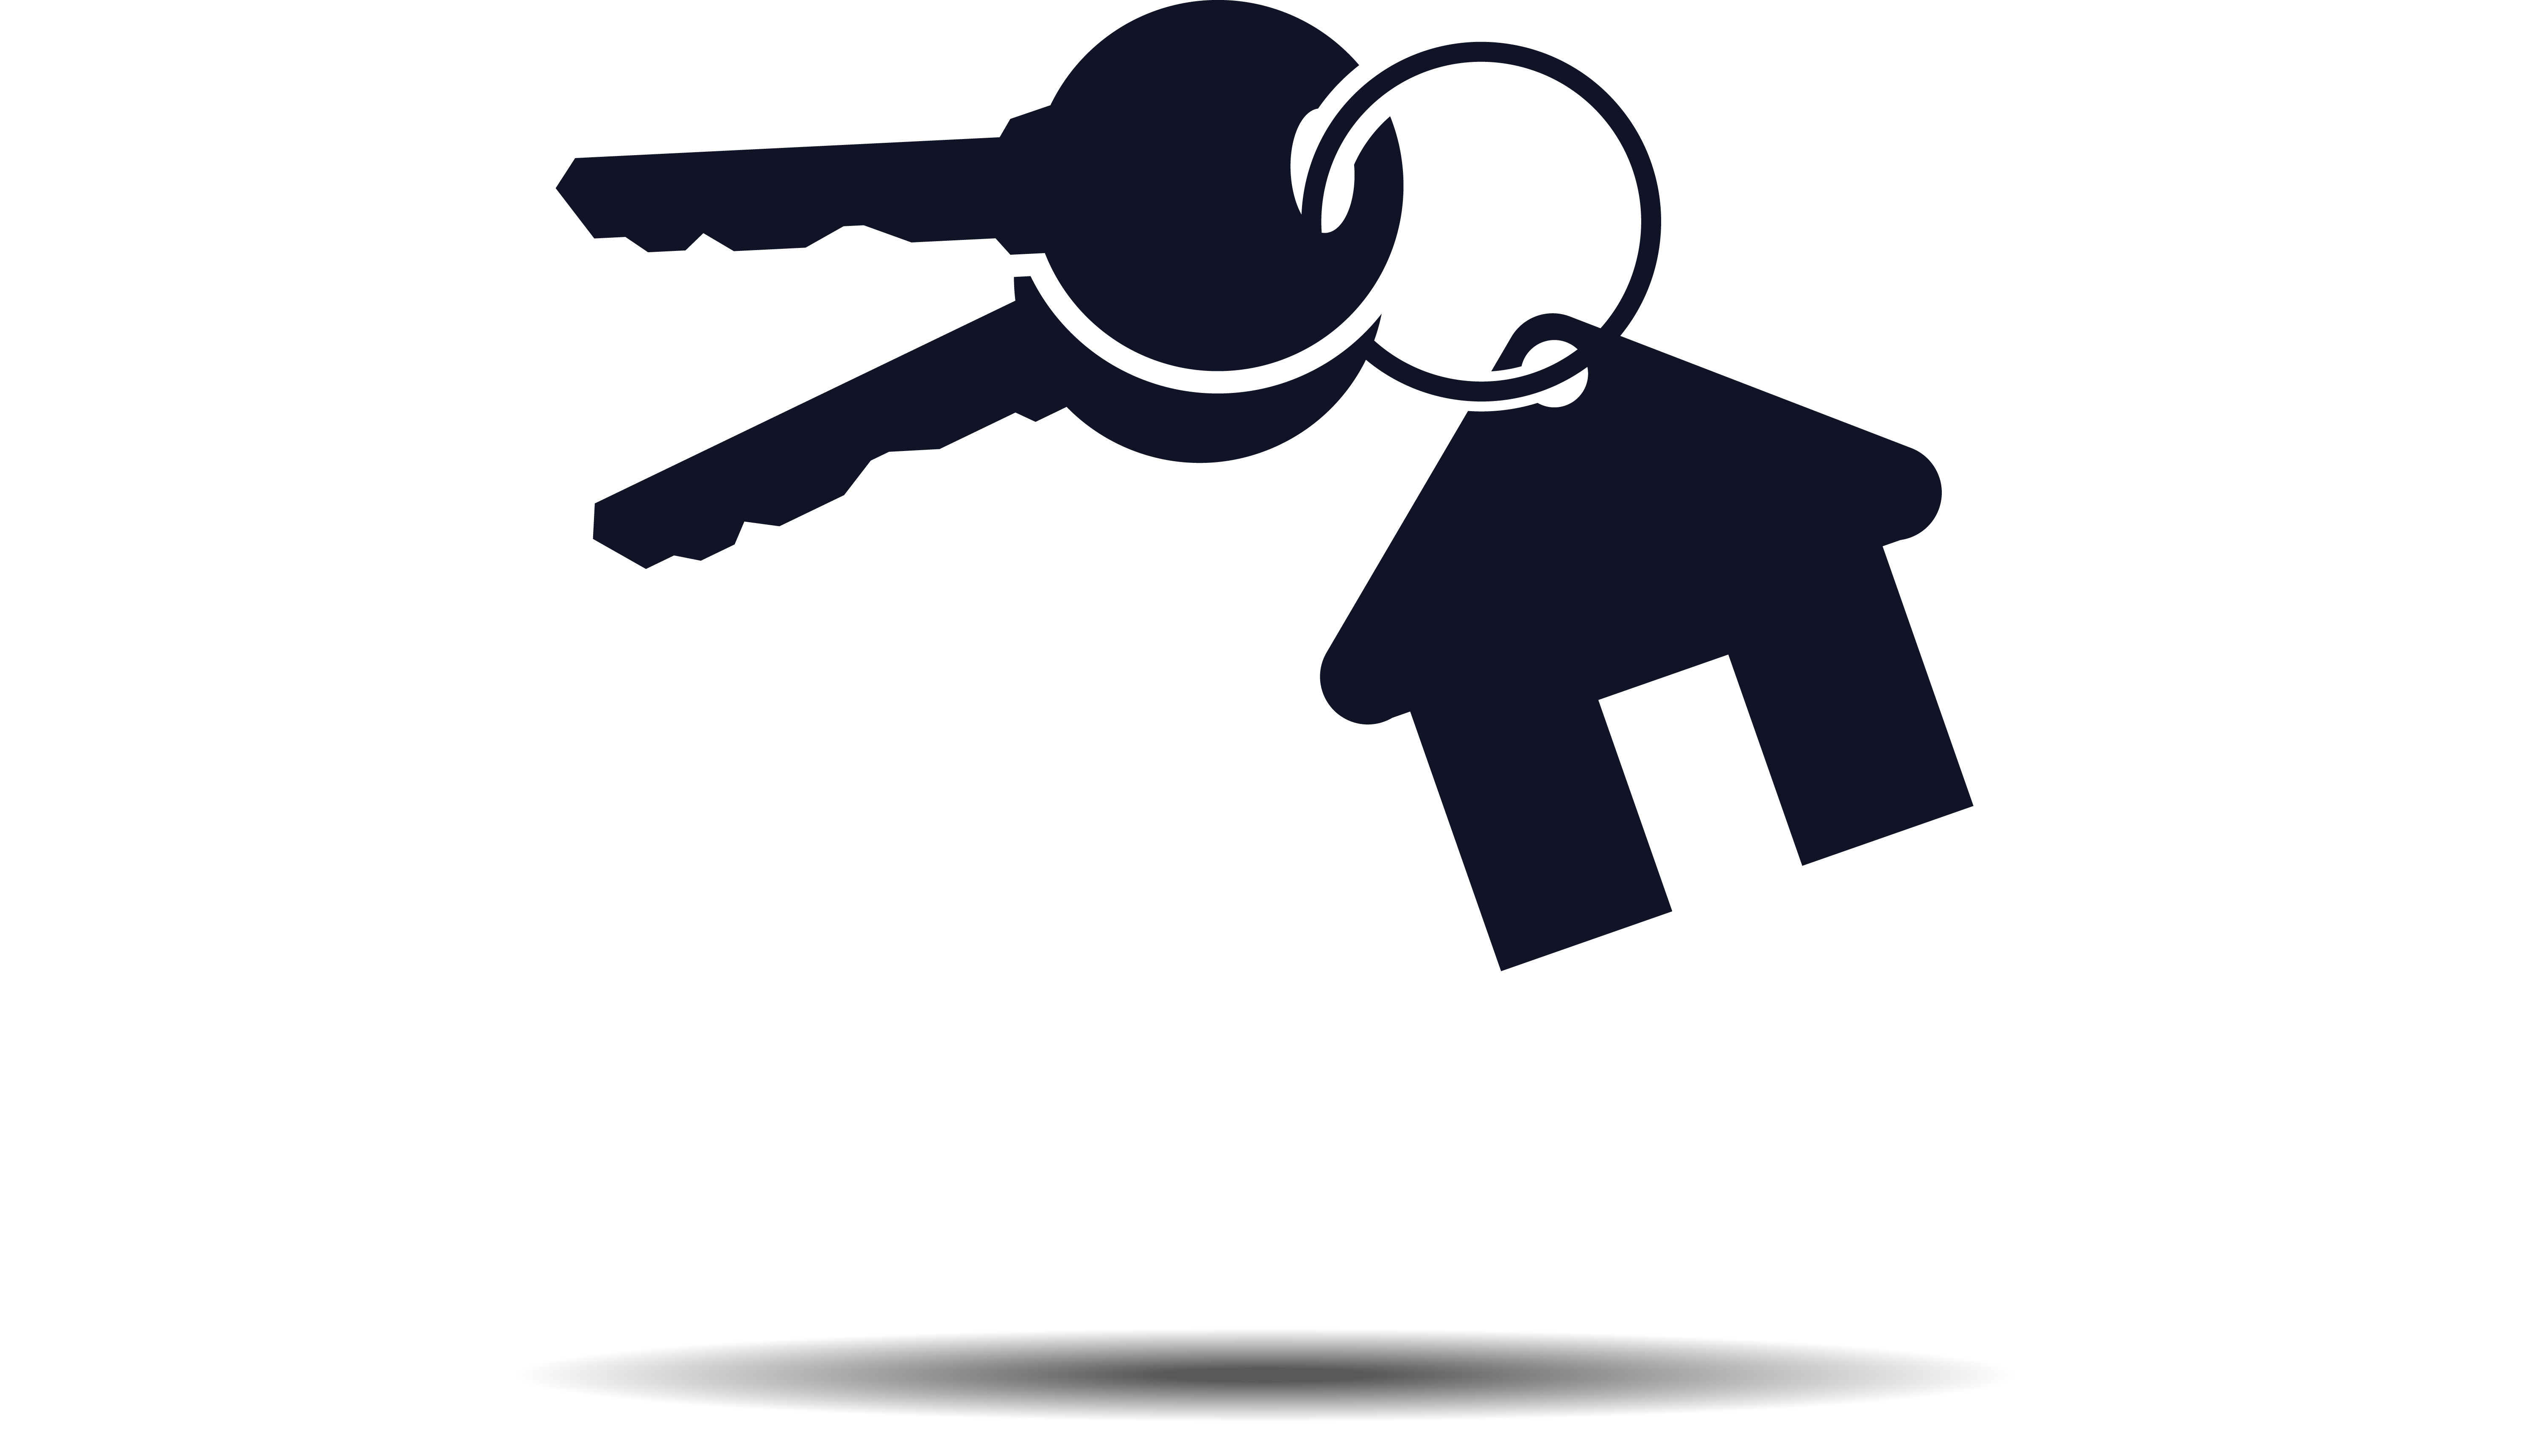 Car silhouette at getdrawings. Clipart key house key